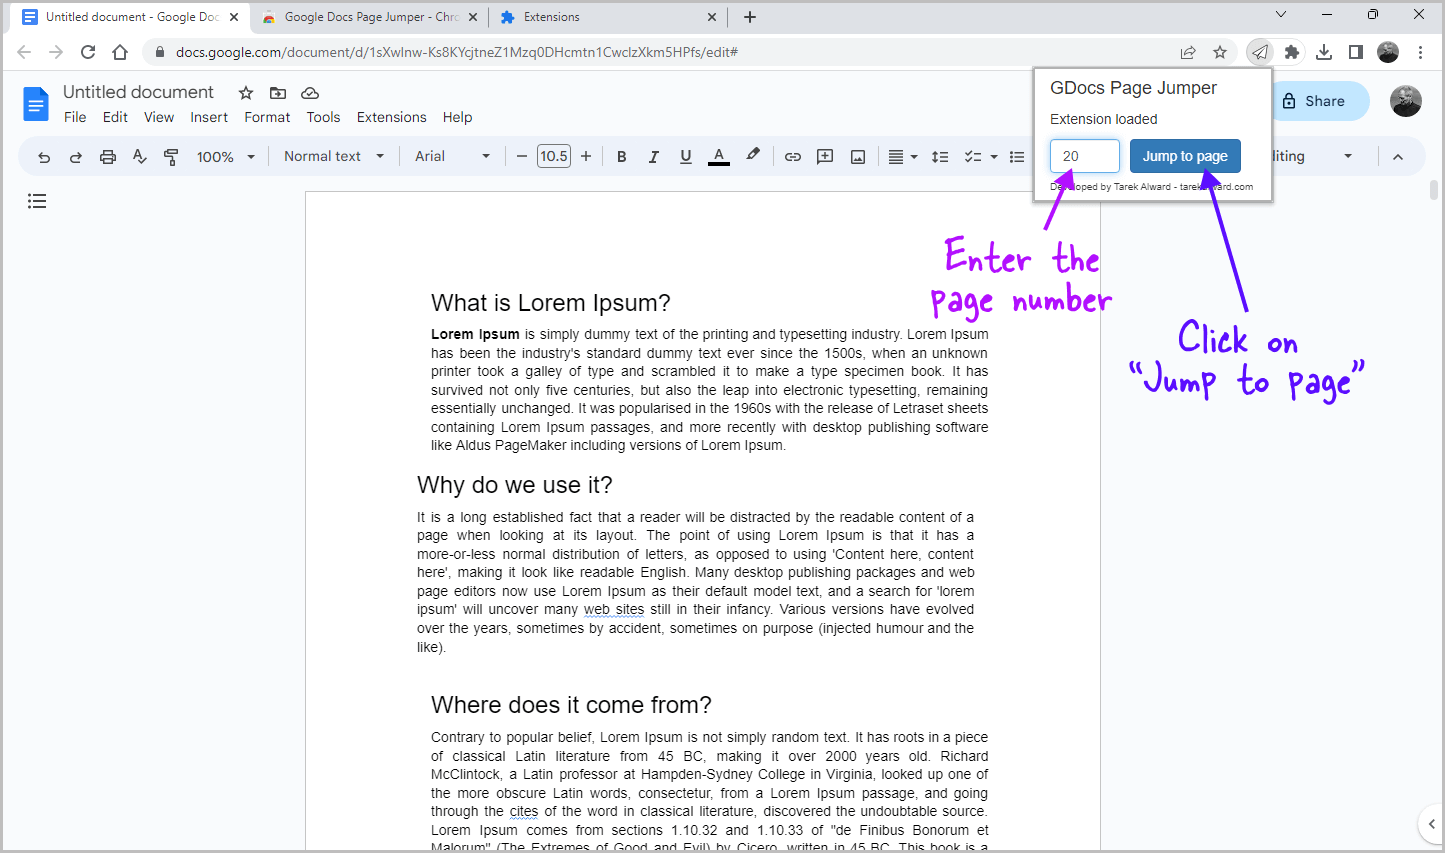 How to Jump to a Page in Google Docs